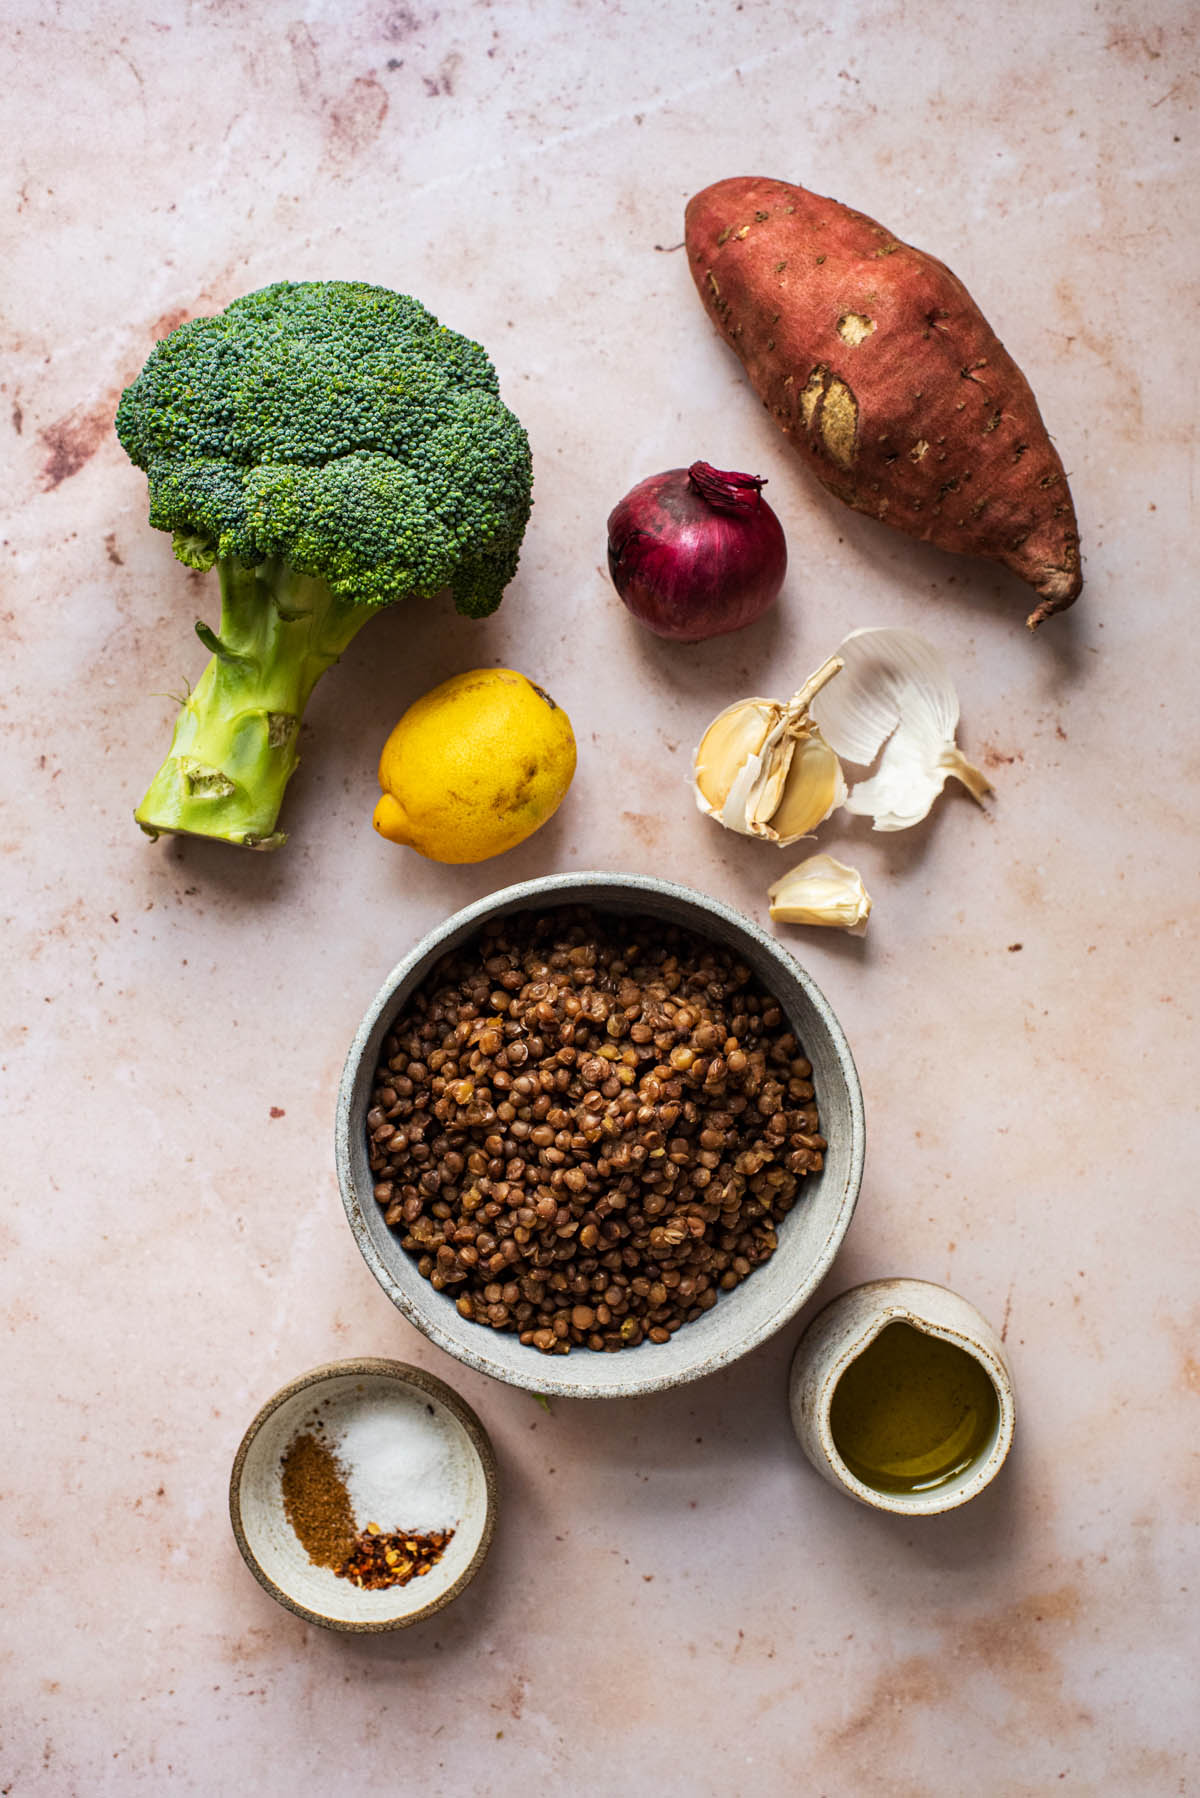 Roasted broccoli and sweet potato lentil bowl ingredients.